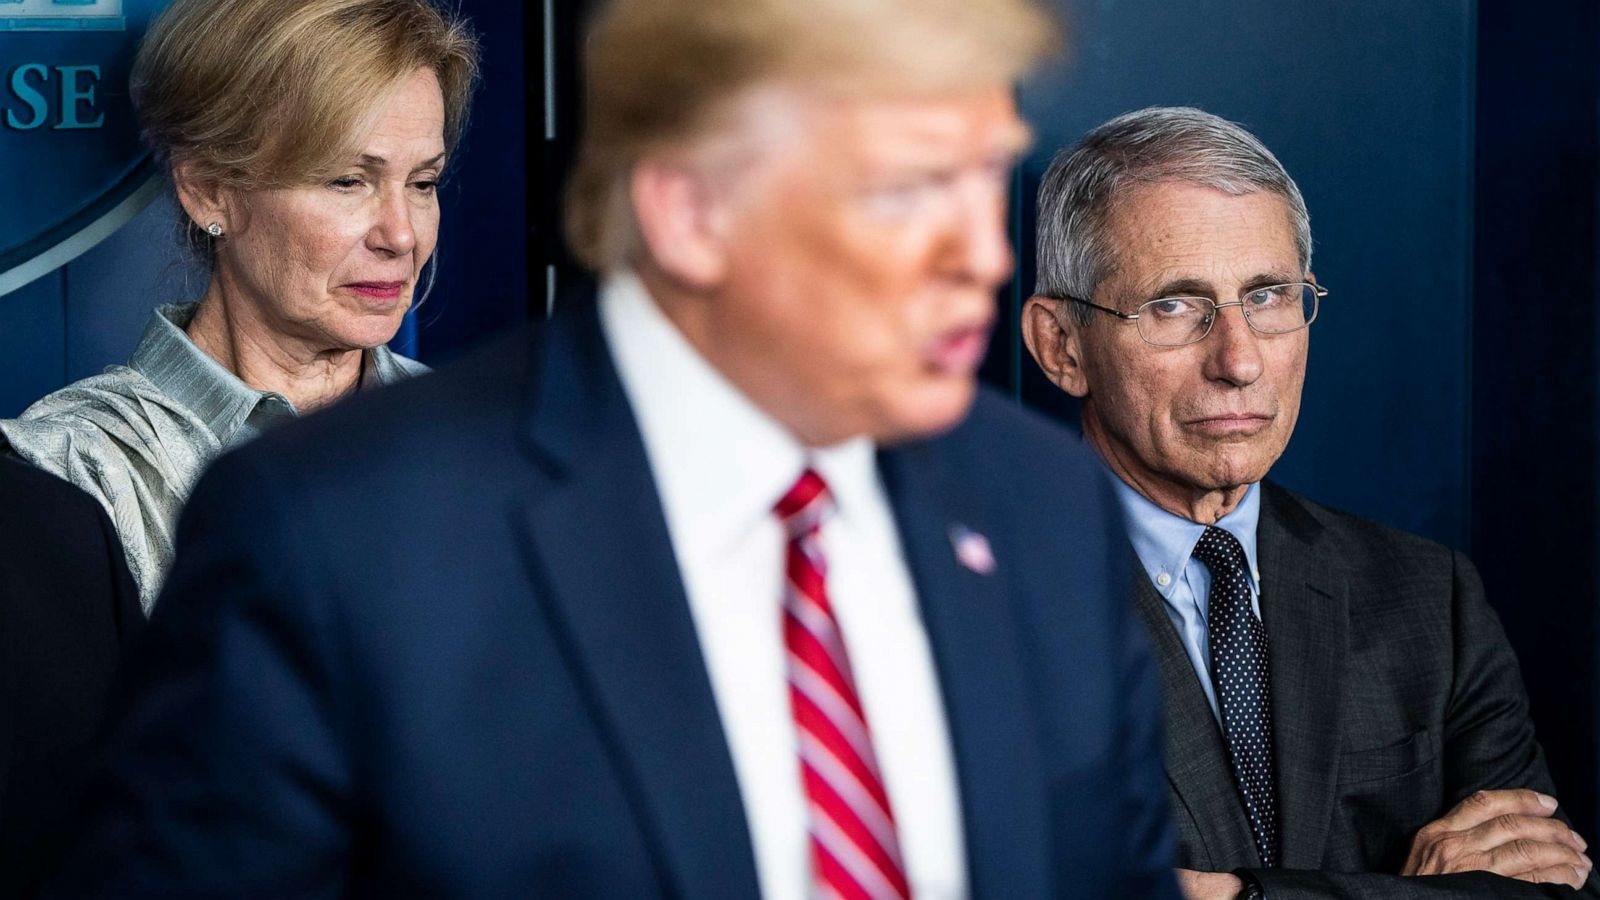 Tensions with Trump: Dr. Anthony Fauci on telling the truth - ABC News